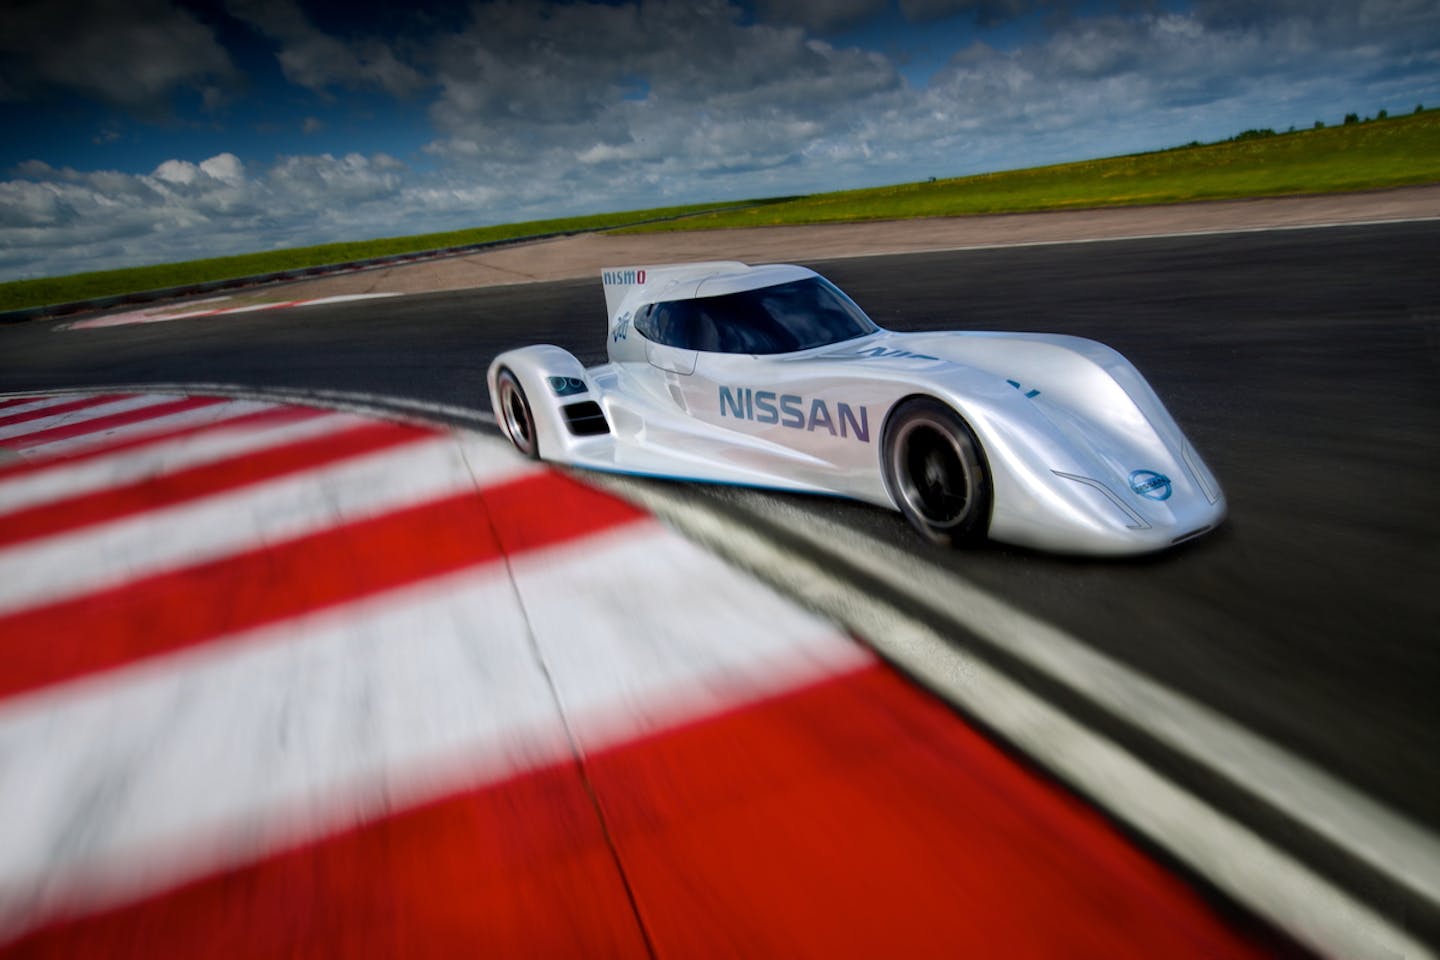 Showcasing the power of electric motors and innovation in racing